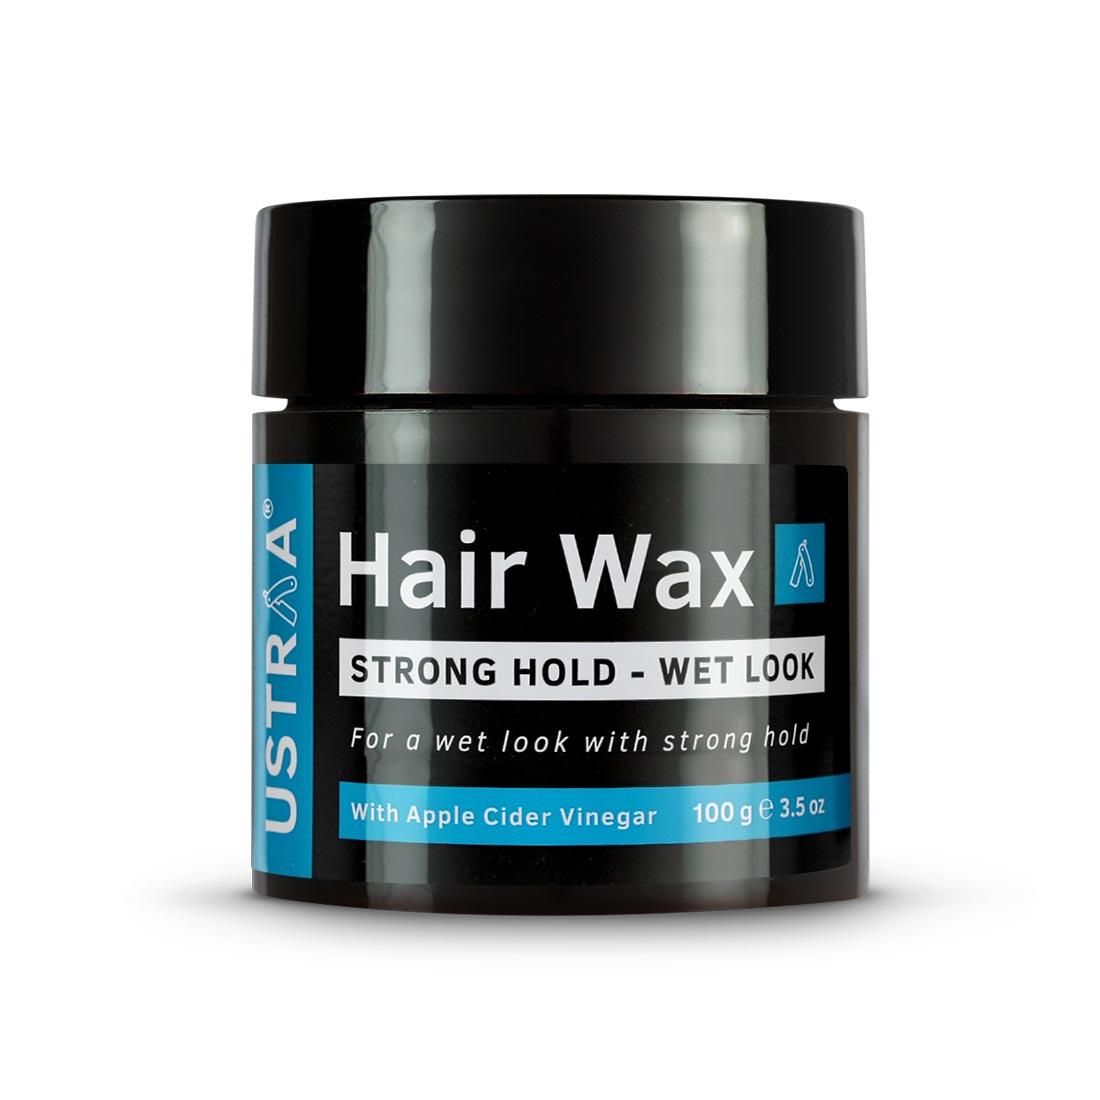 Strong Hold with Wet Look | No Harmful Chemicals |Hair Wax Wet Look |Ustraa